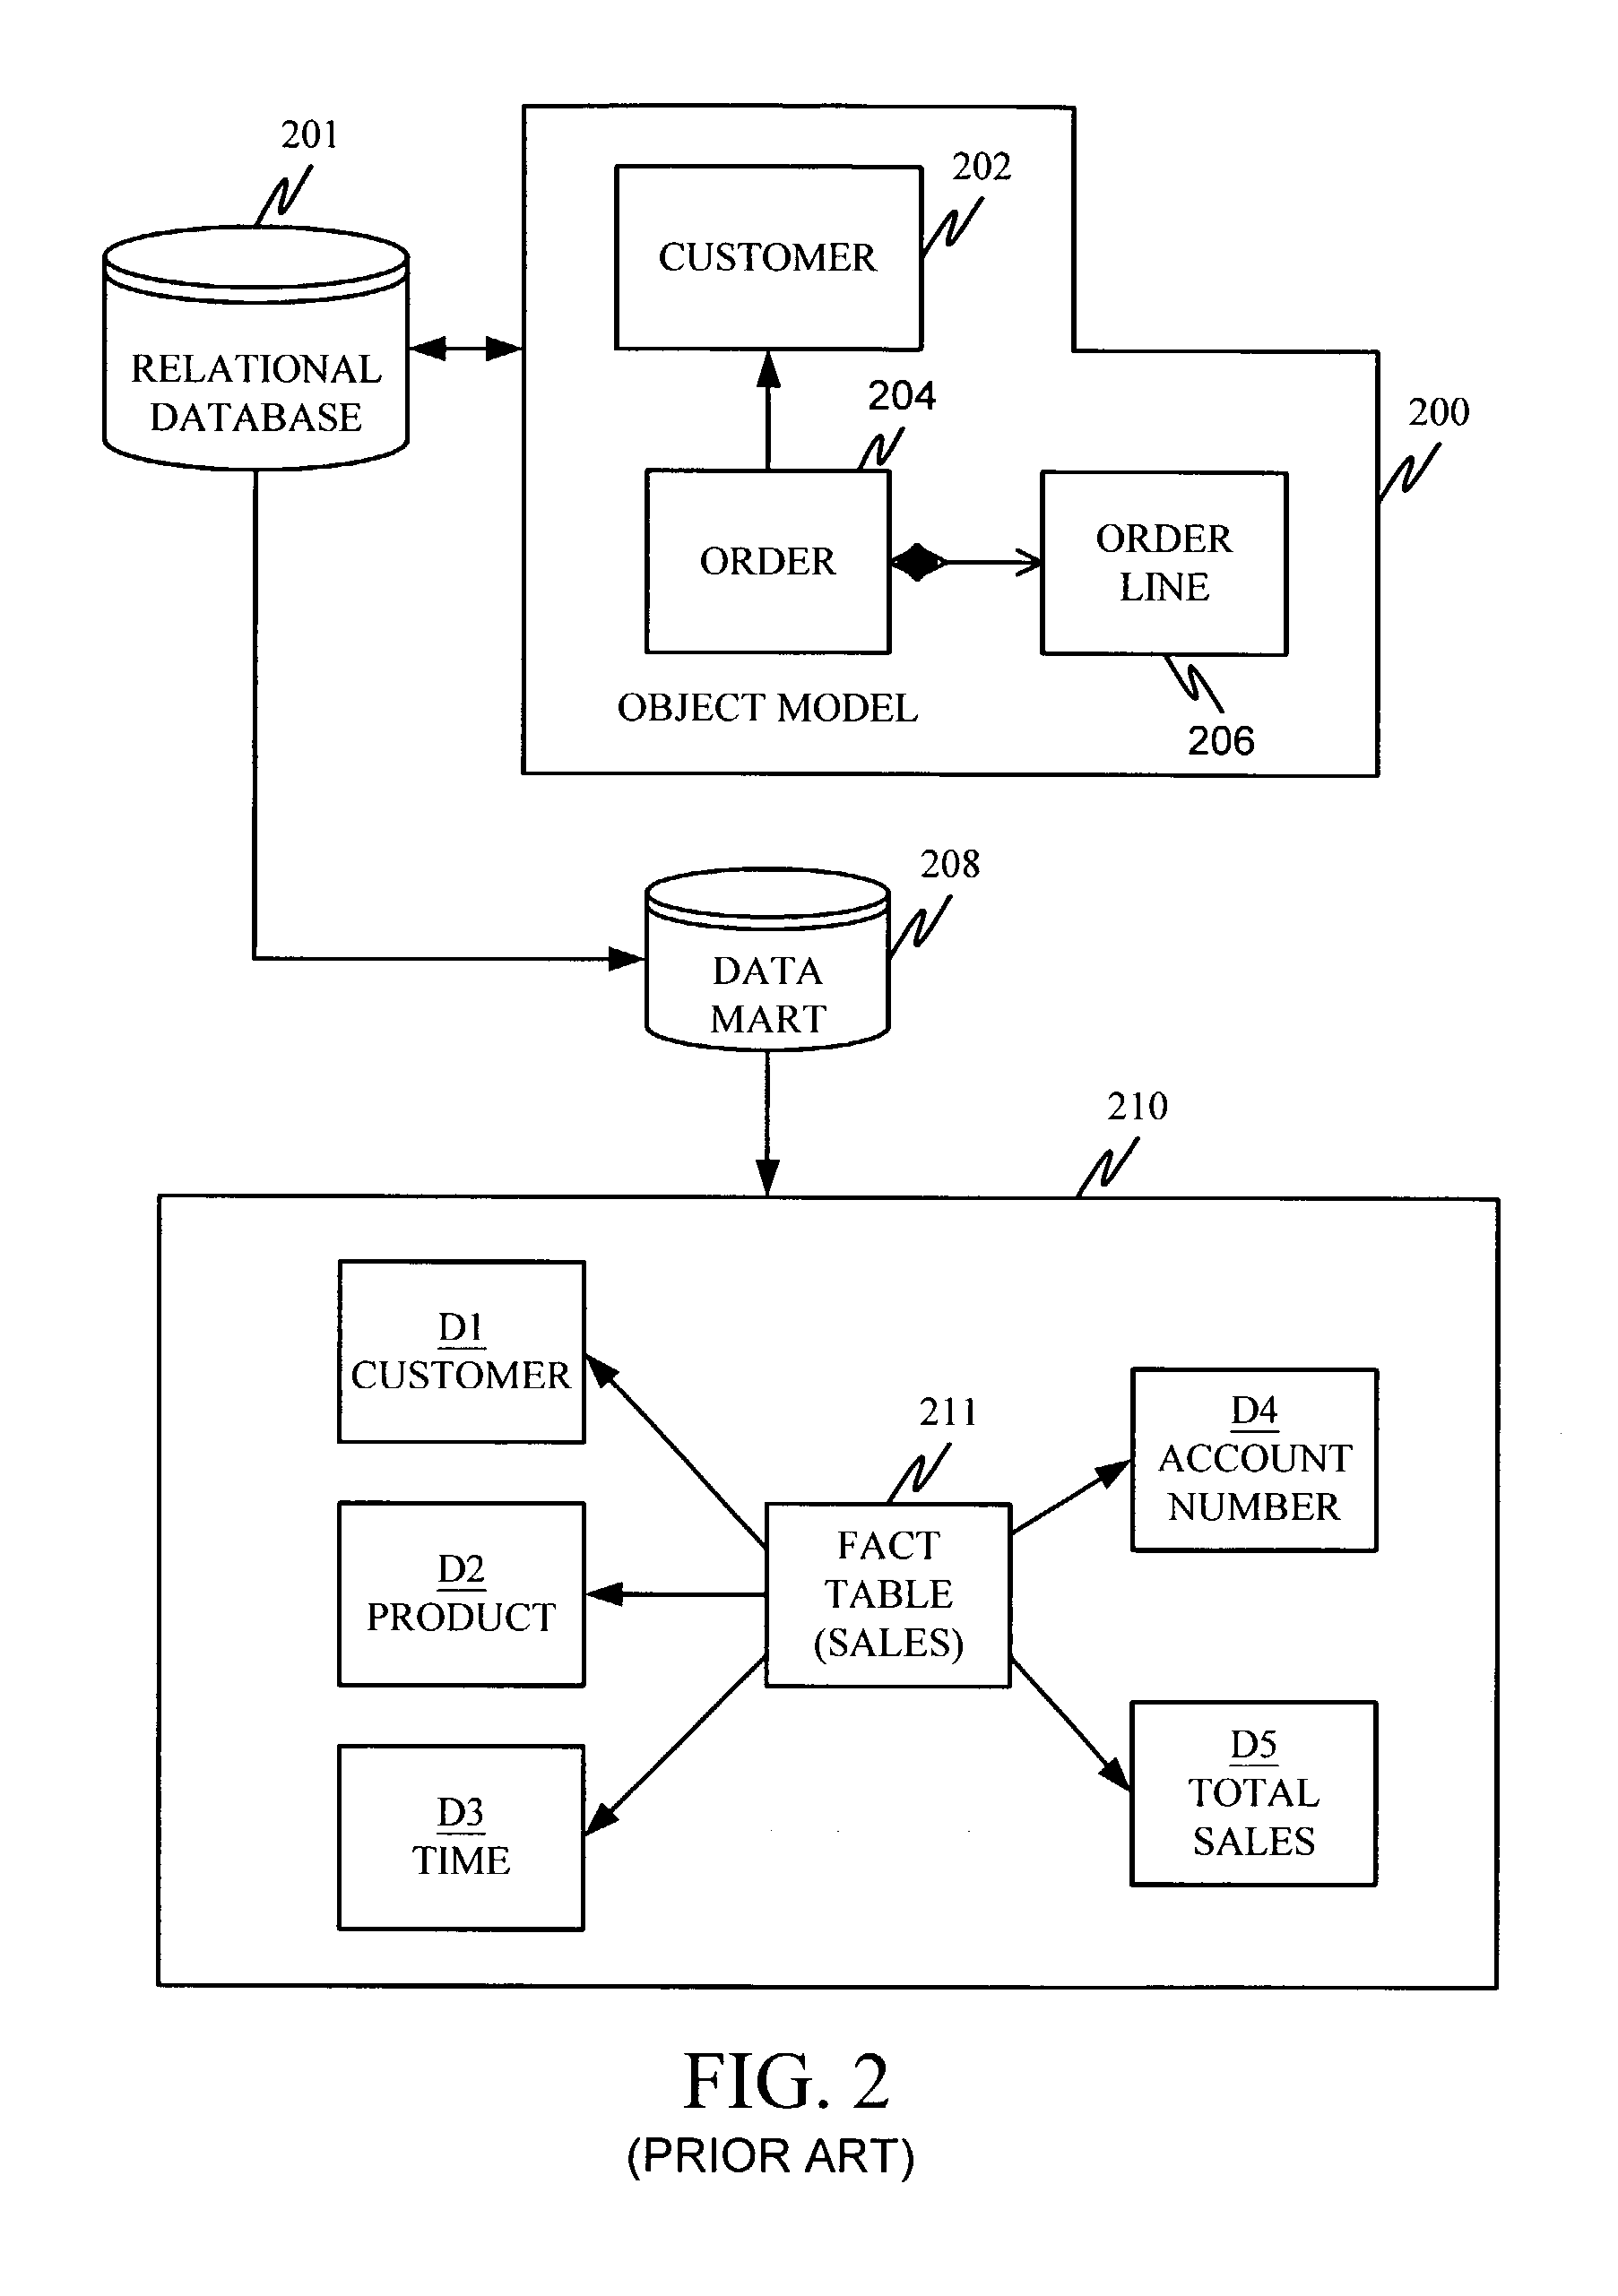 Automatic generation of a dimensional model for business analytics from an object model for online transaction processing